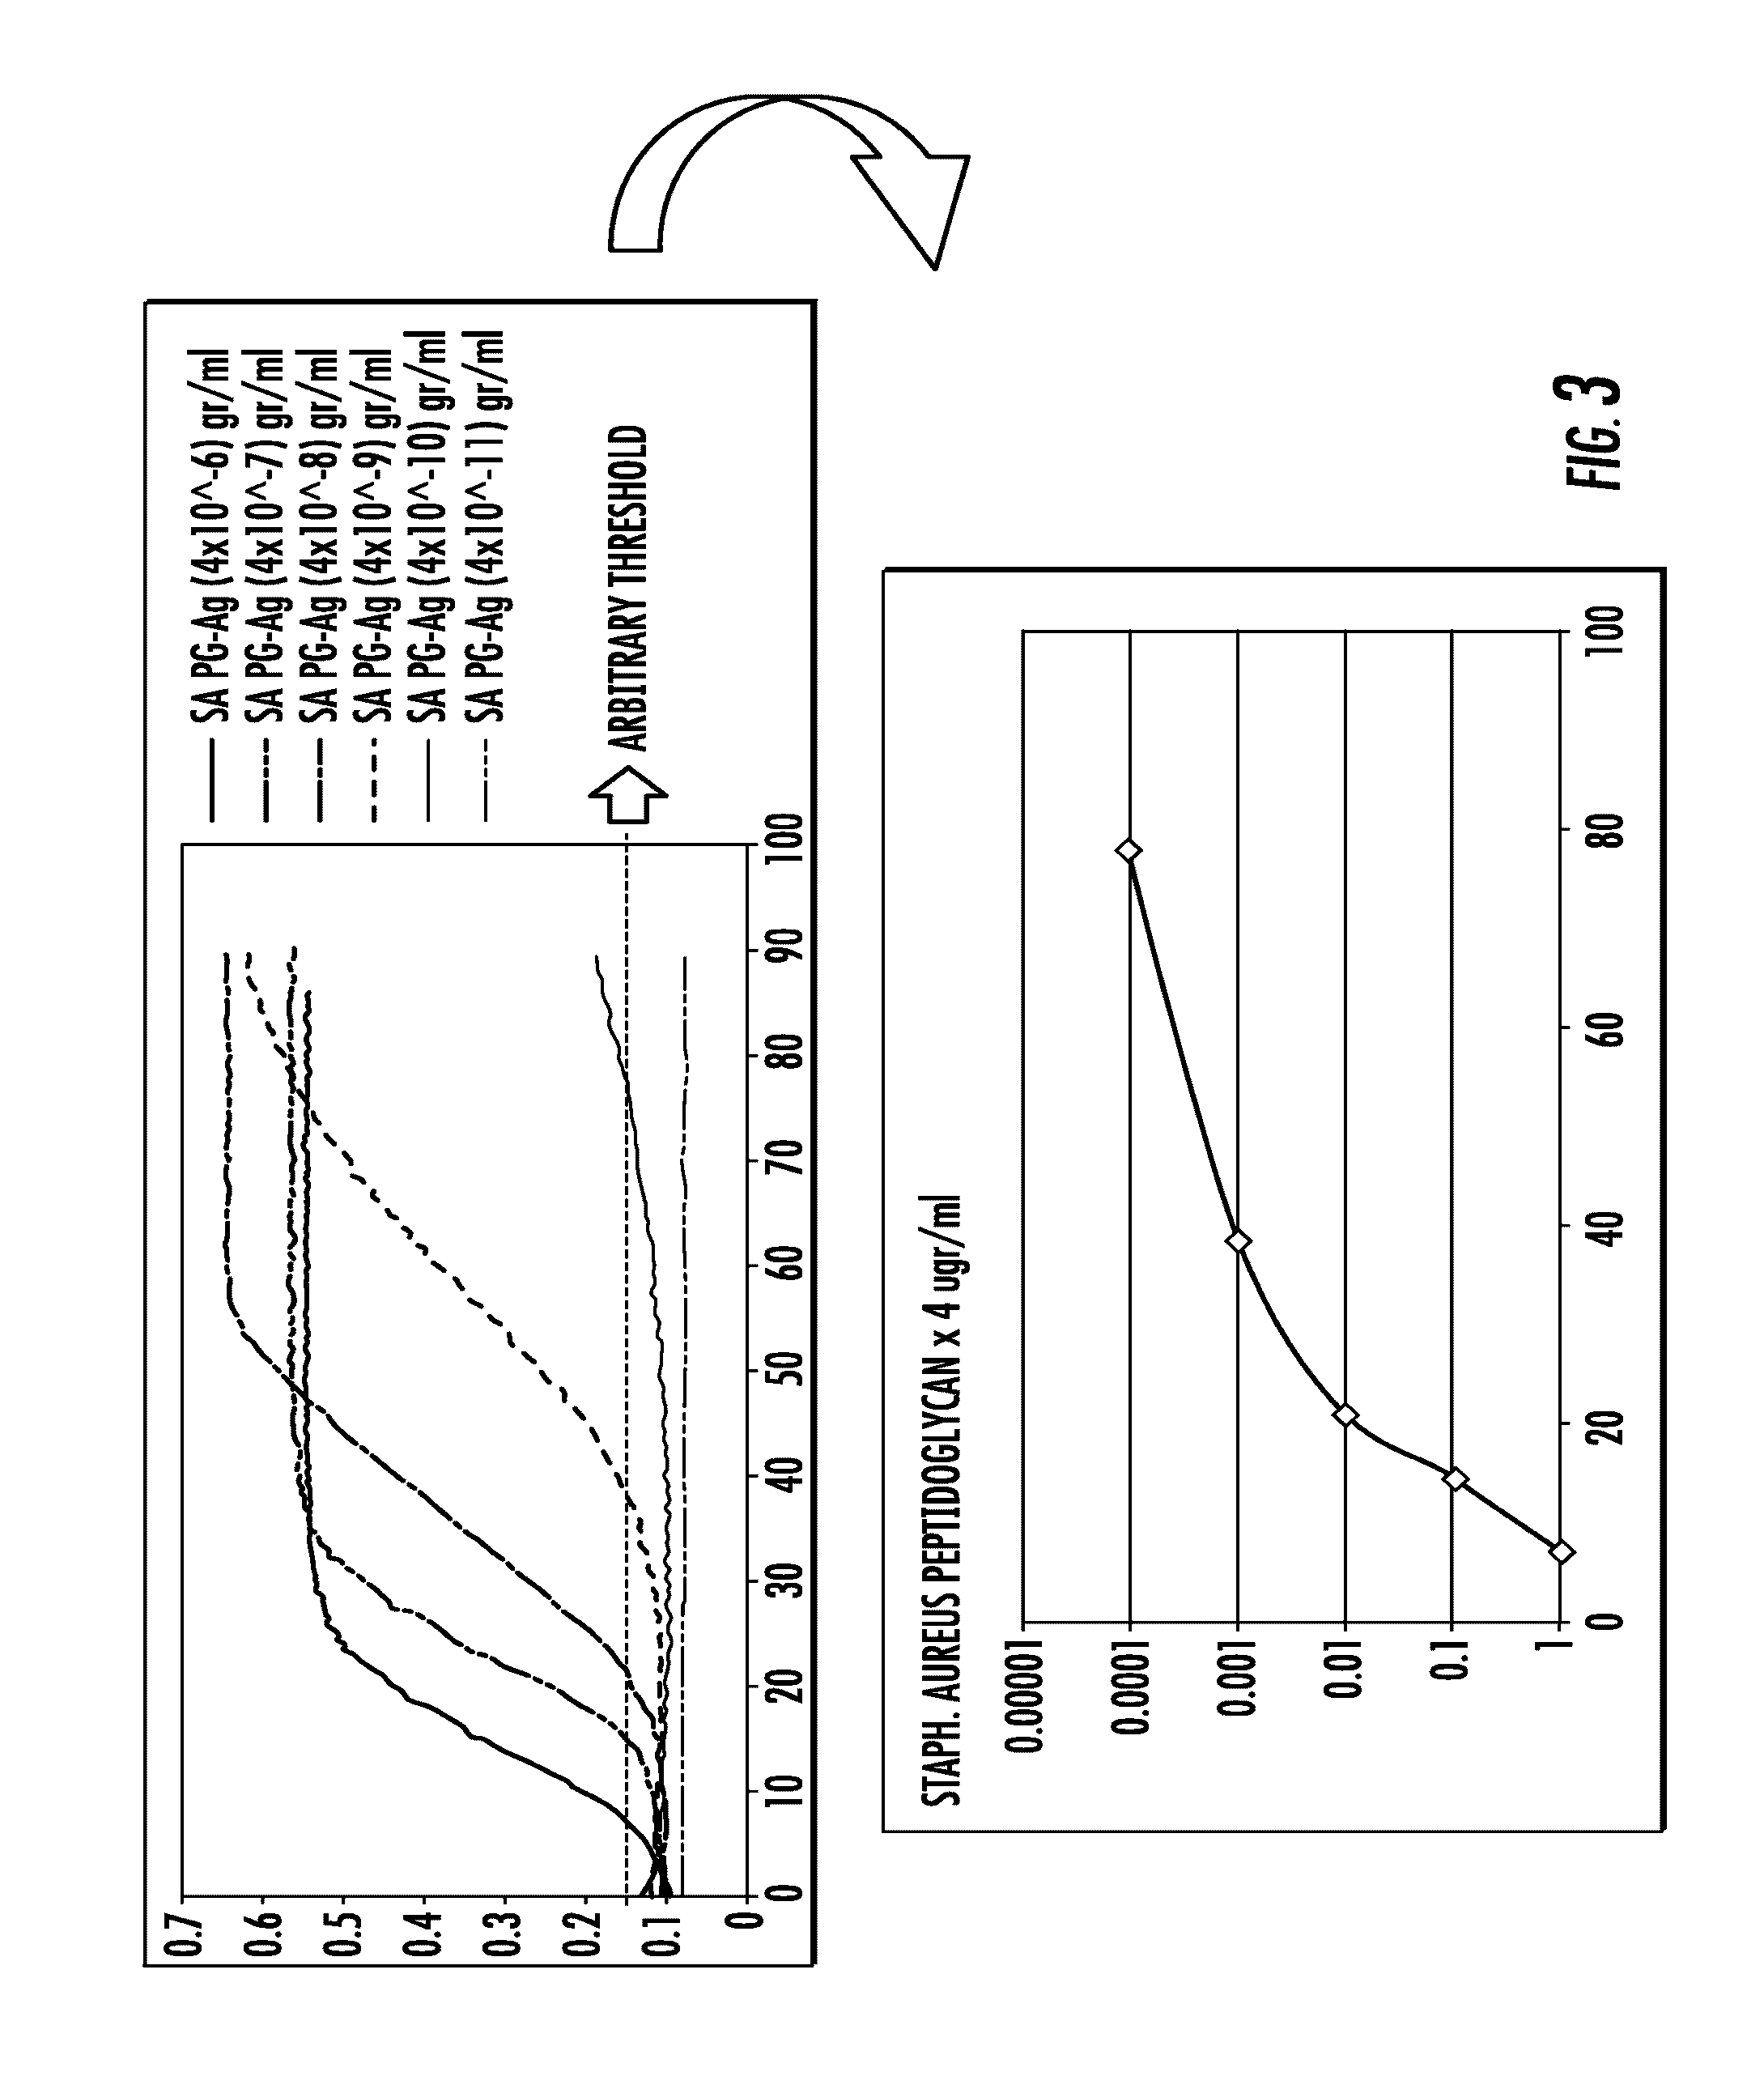 Materials and methods for diagnosis of peri-implant bone and joint infections using  prophenoloxidase pathway